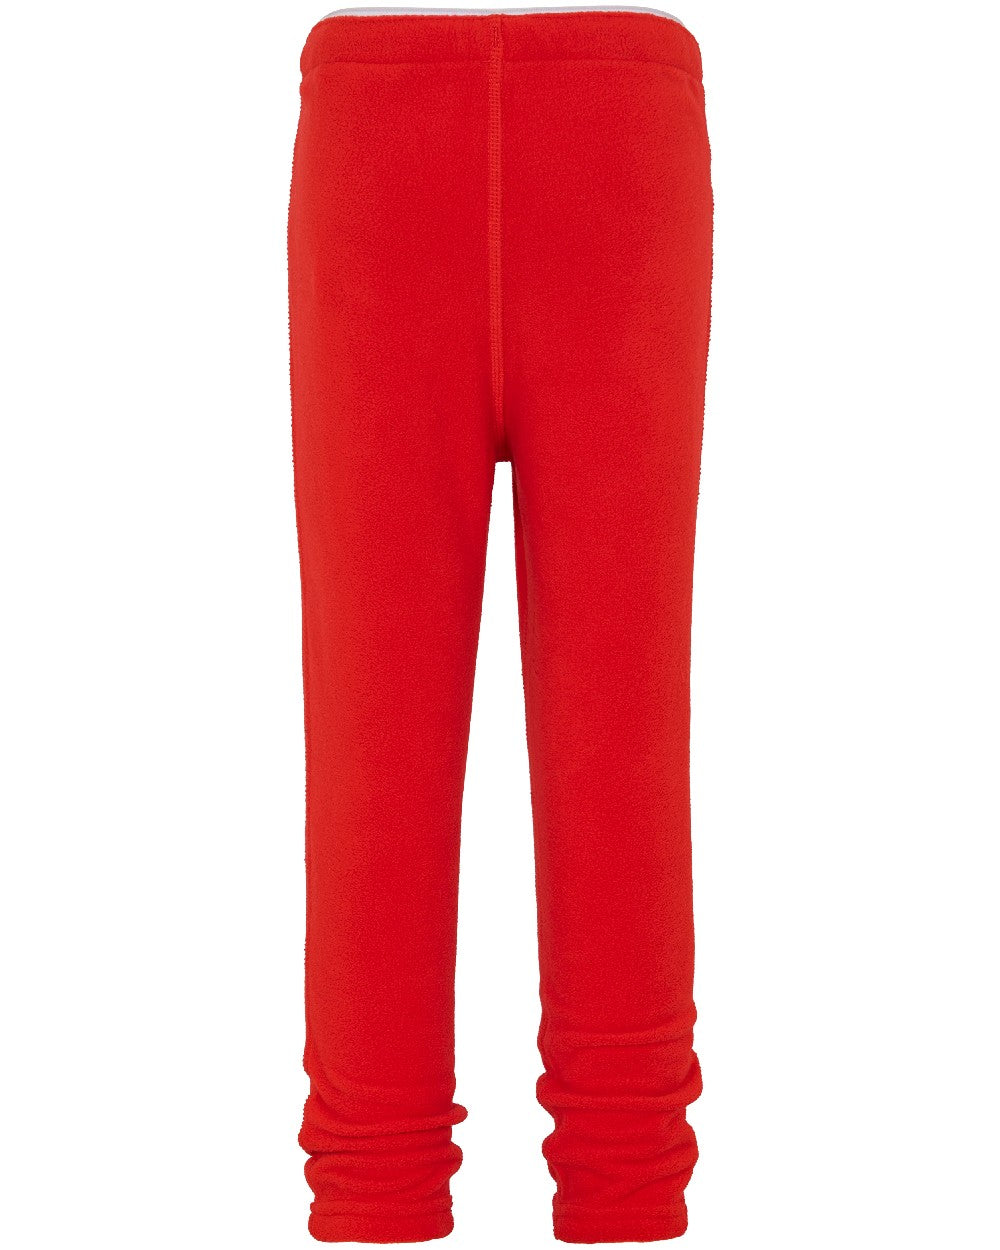 Didriksons Monte Kids Pants in Chili Red 